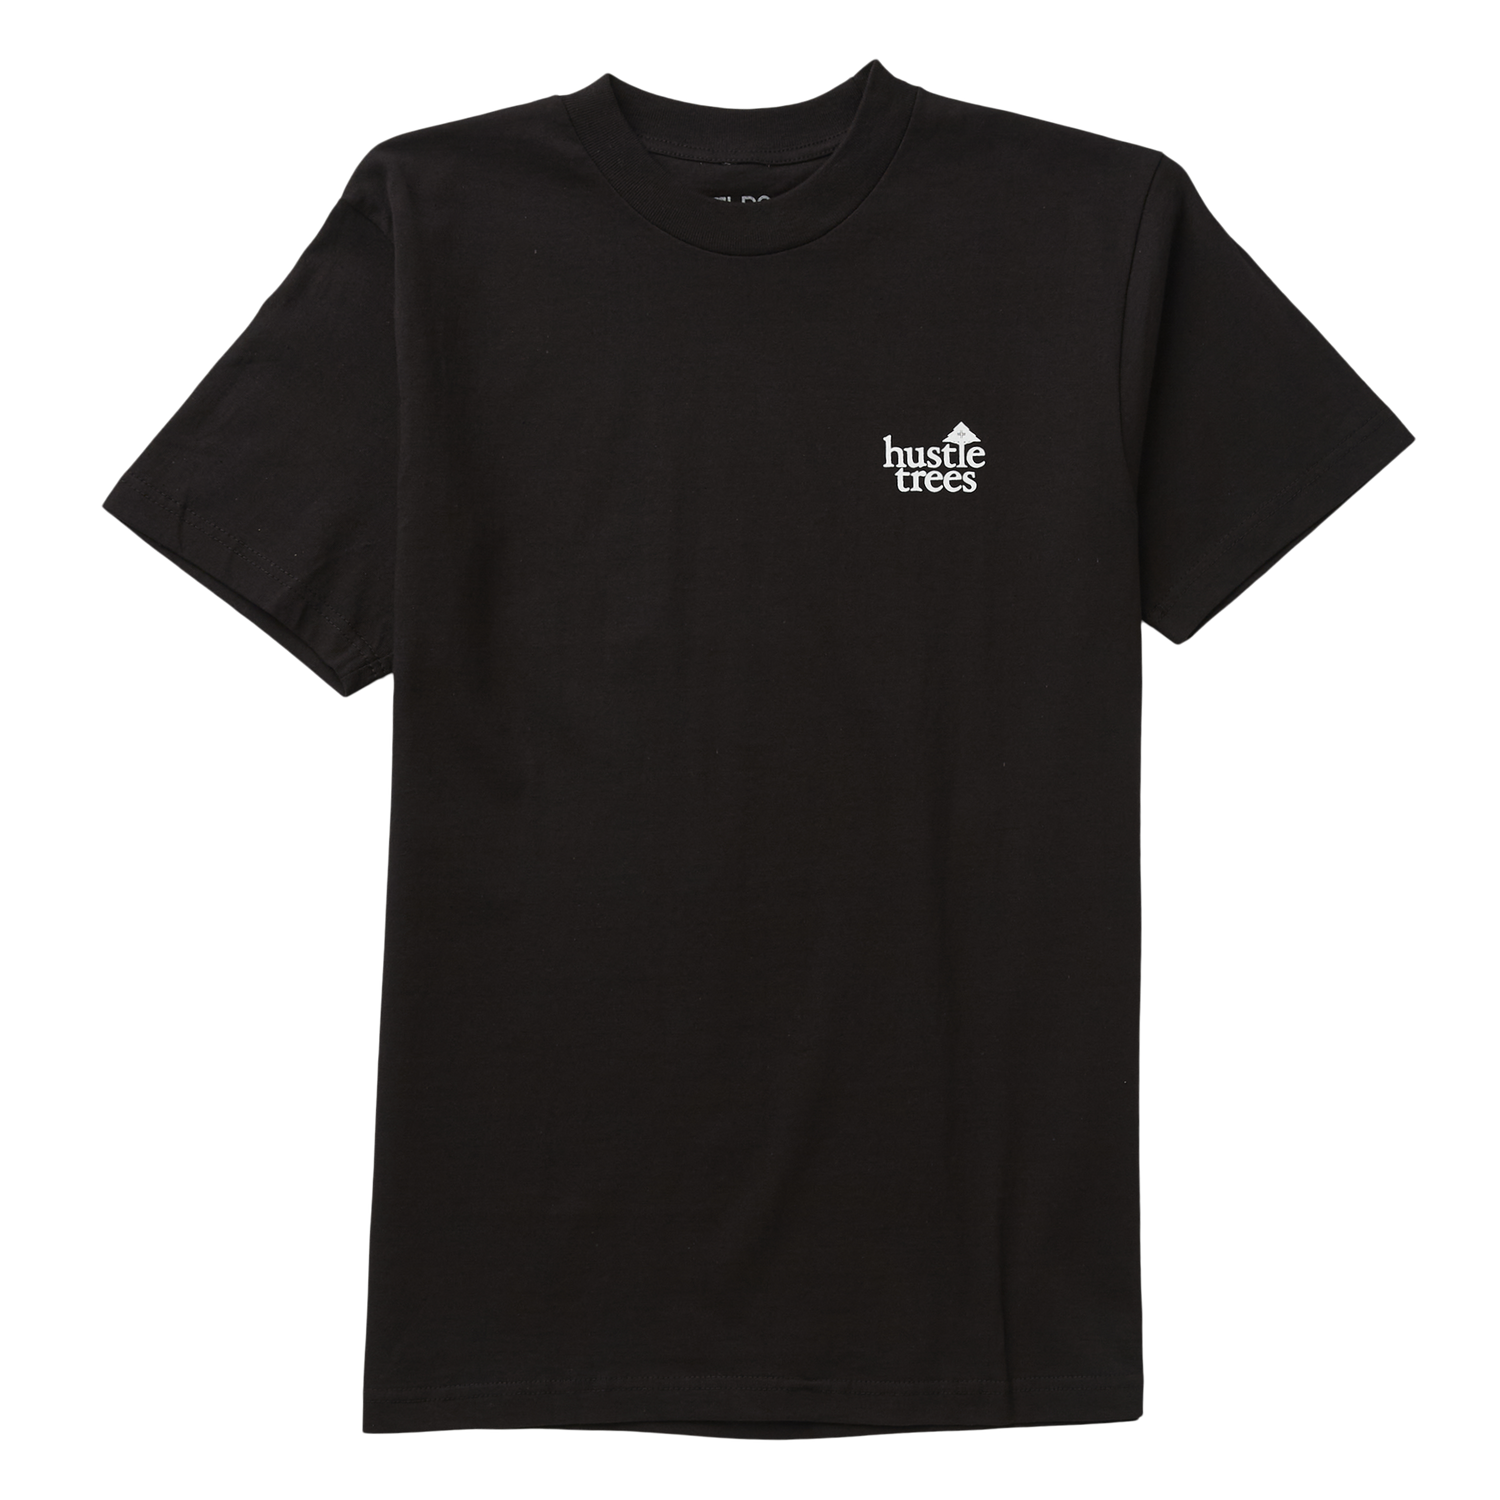 JOINT CHIEFS TEE - BLACK